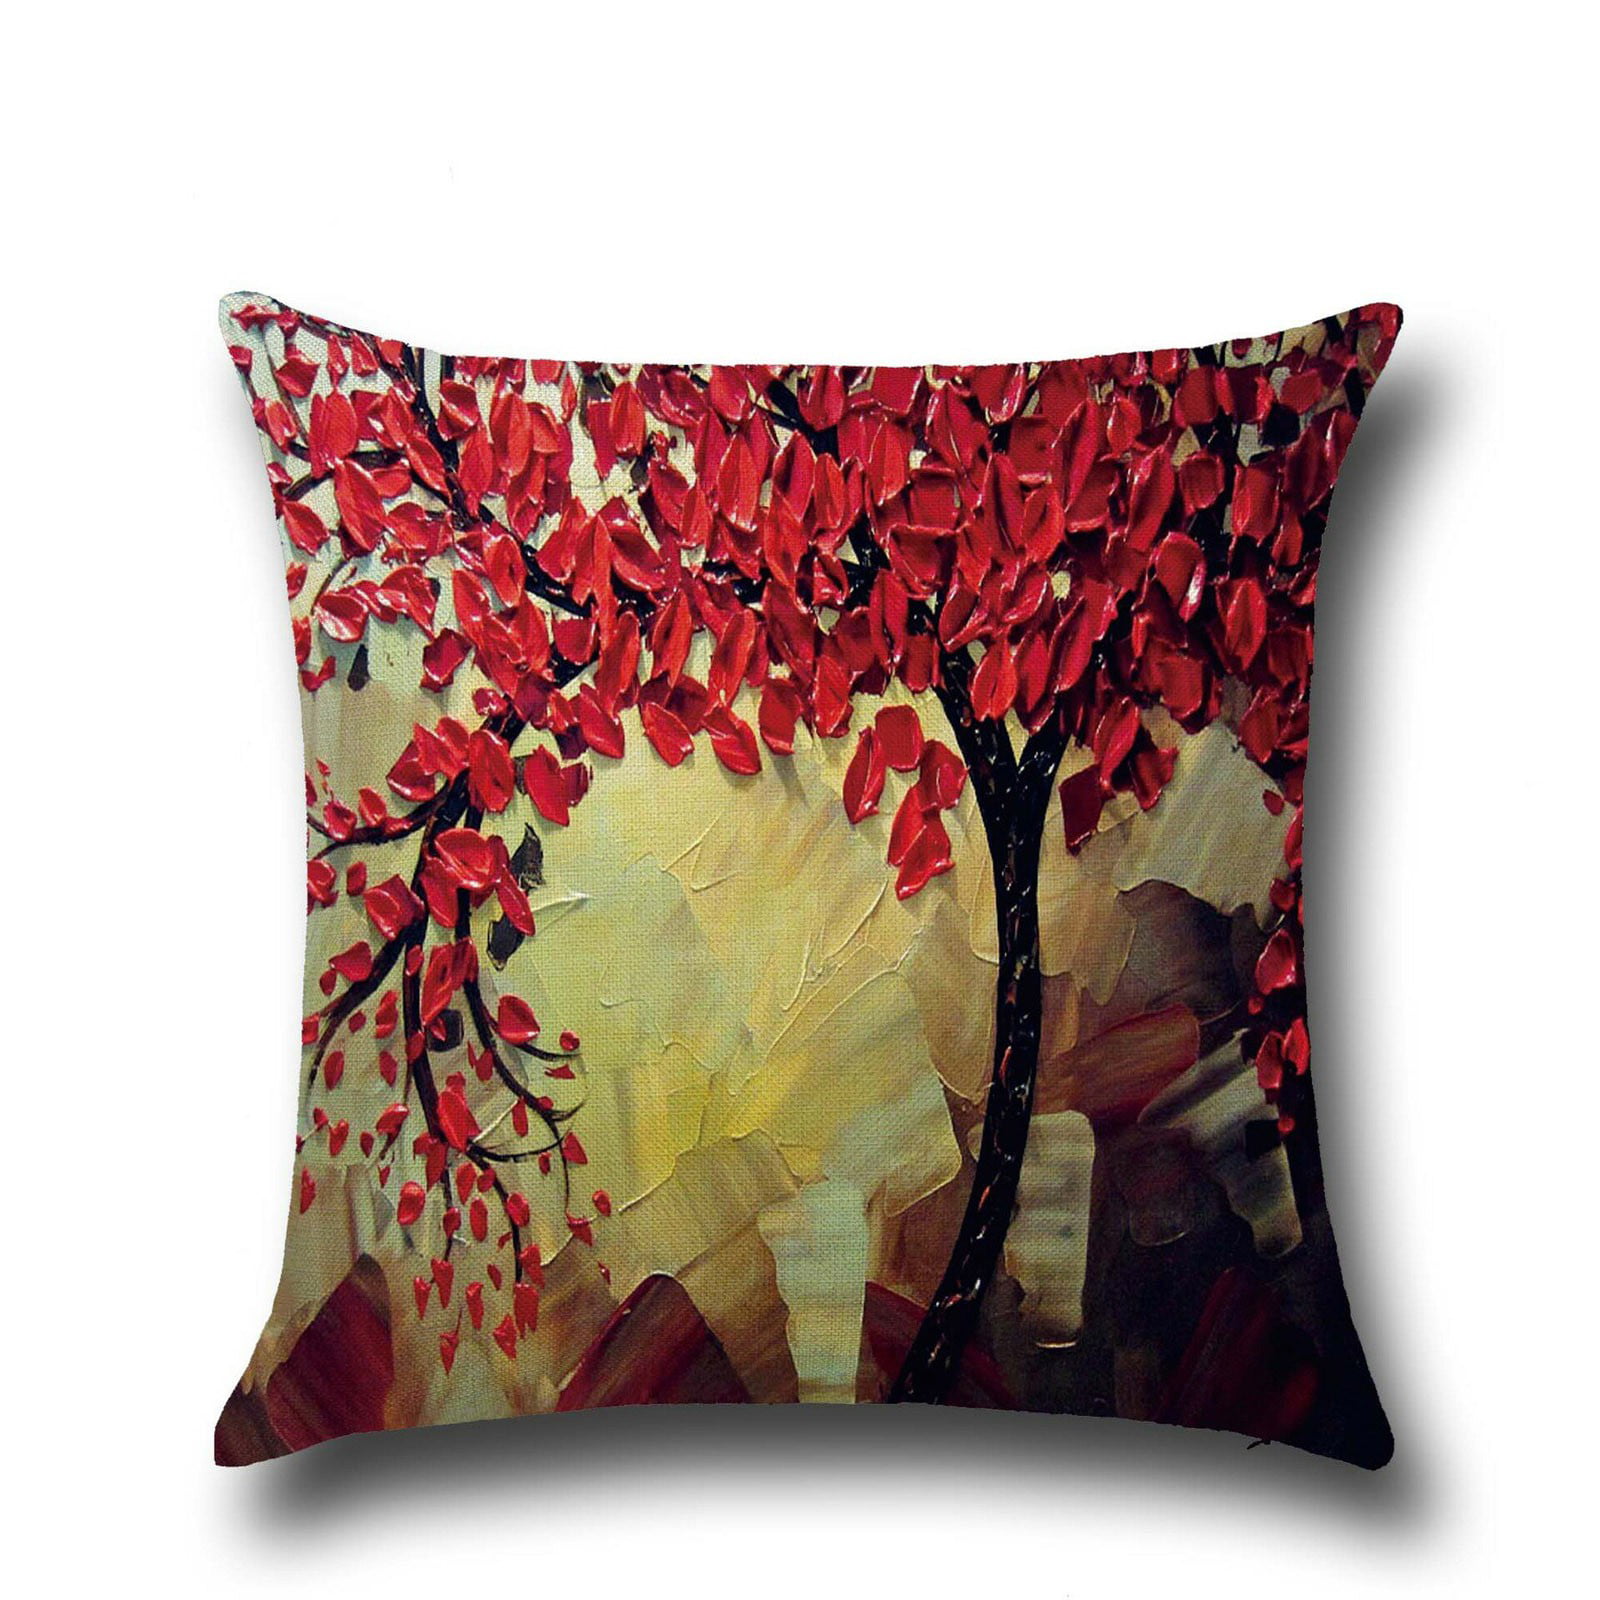 Details about   Flowers Tree Square Cotton Pillow Case Sofa Bed Waist Throw Cushion Cover Decor 